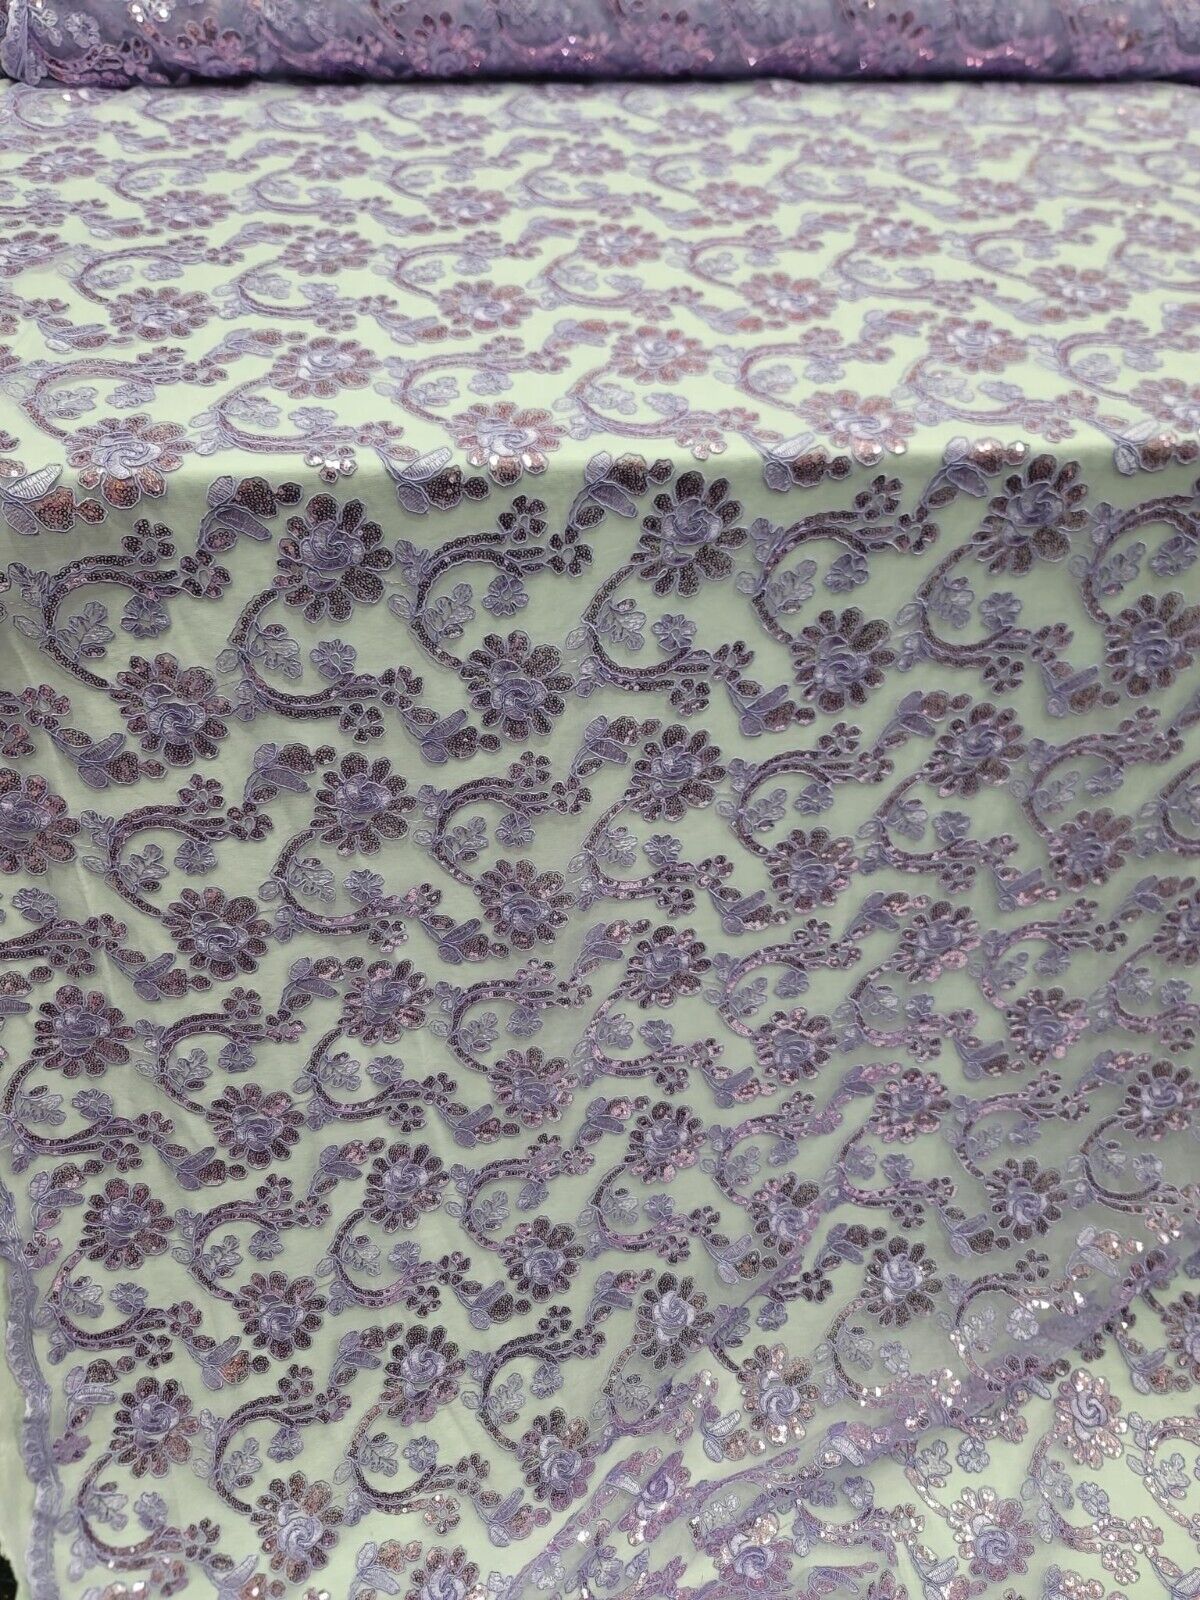 Lavender Lace Corded Flower Embroidery Sequins Mesh Fabric - Sold By the Yard - For Dress